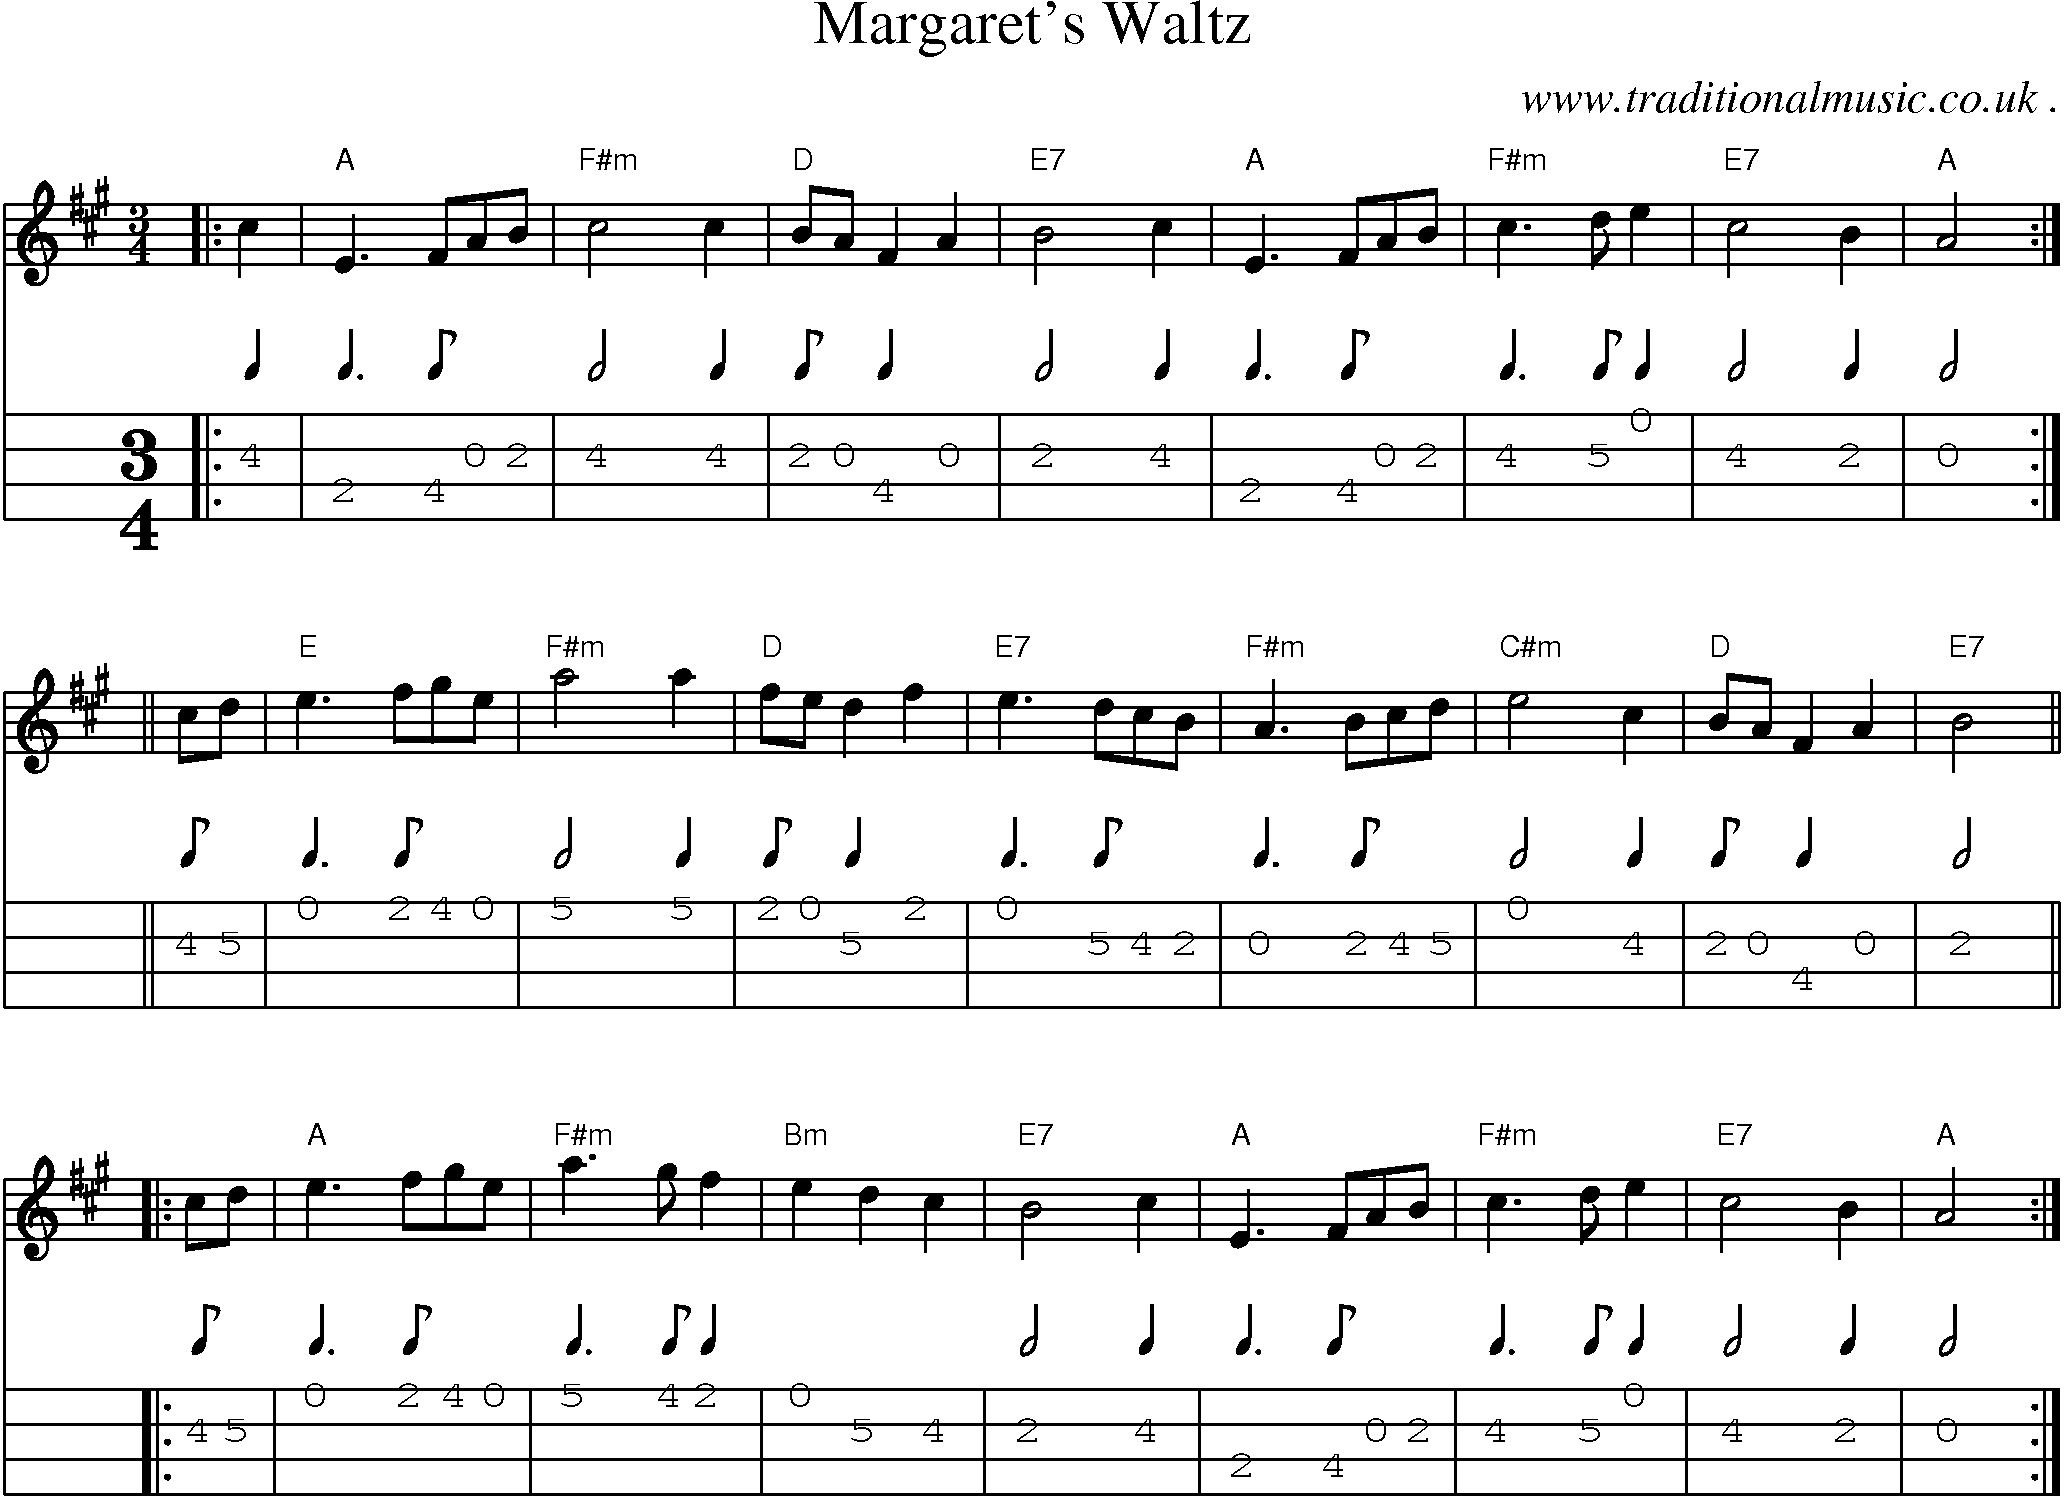 Sheet-music  score, Chords and Mandolin Tabs for Margarets Waltz1